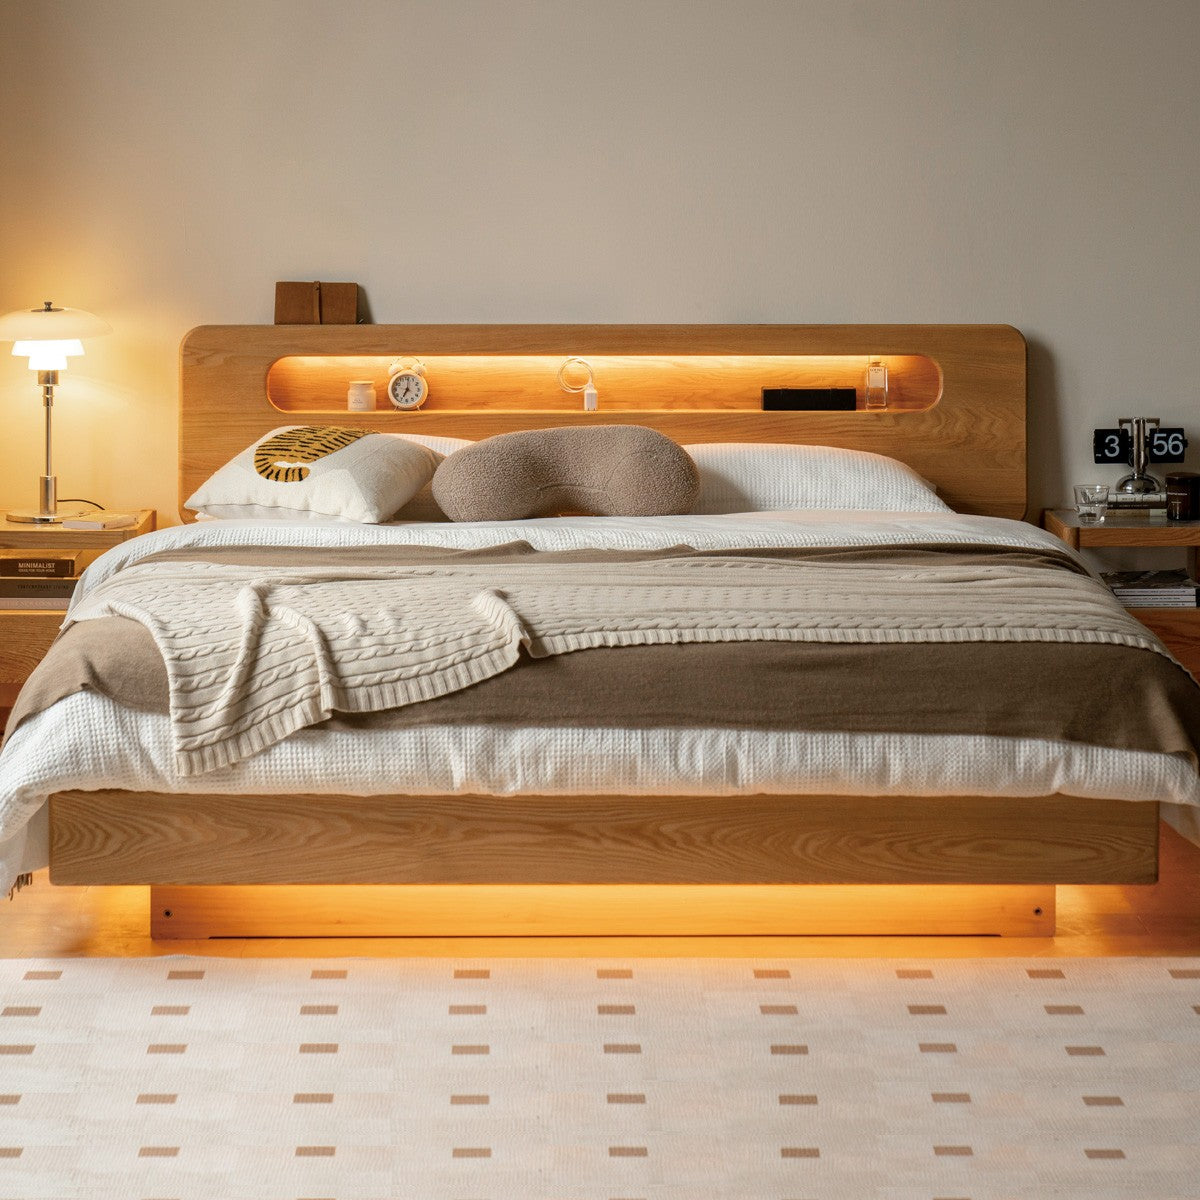 Oak solid wood box bed soft light protection_)